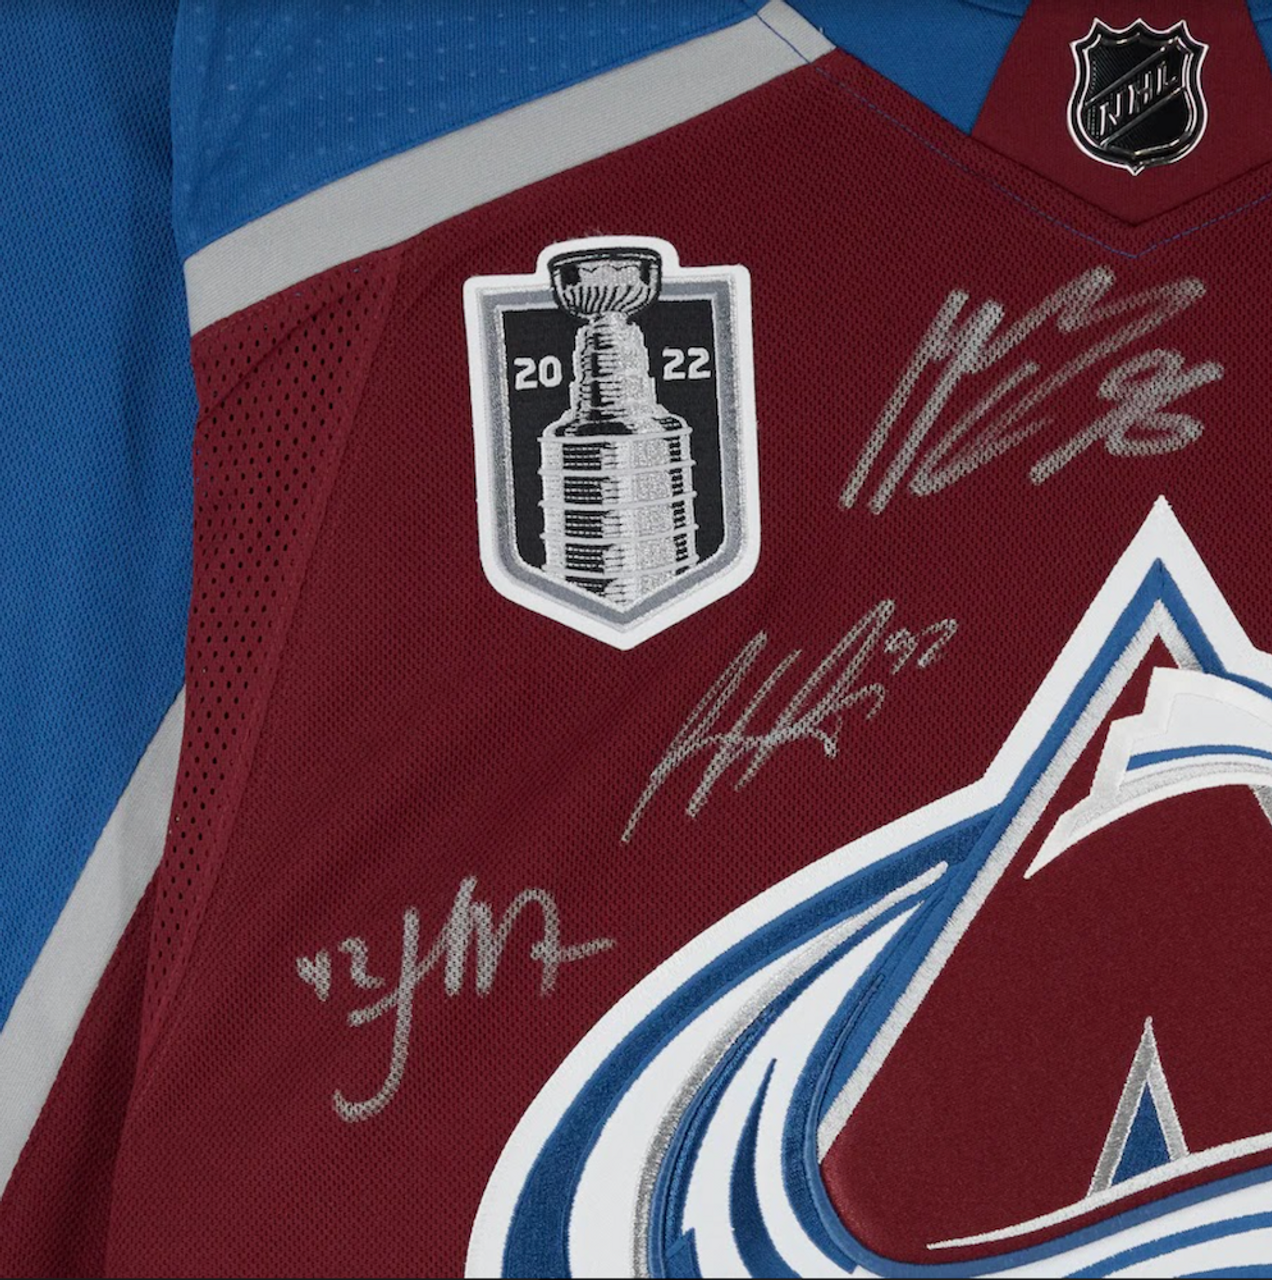 Nathan MacKinnon Colorado Avalanche Autographed 2022 Stanley Cup Champions  Burgundy adidas Authentic Jersey with Stanley Cup Patch